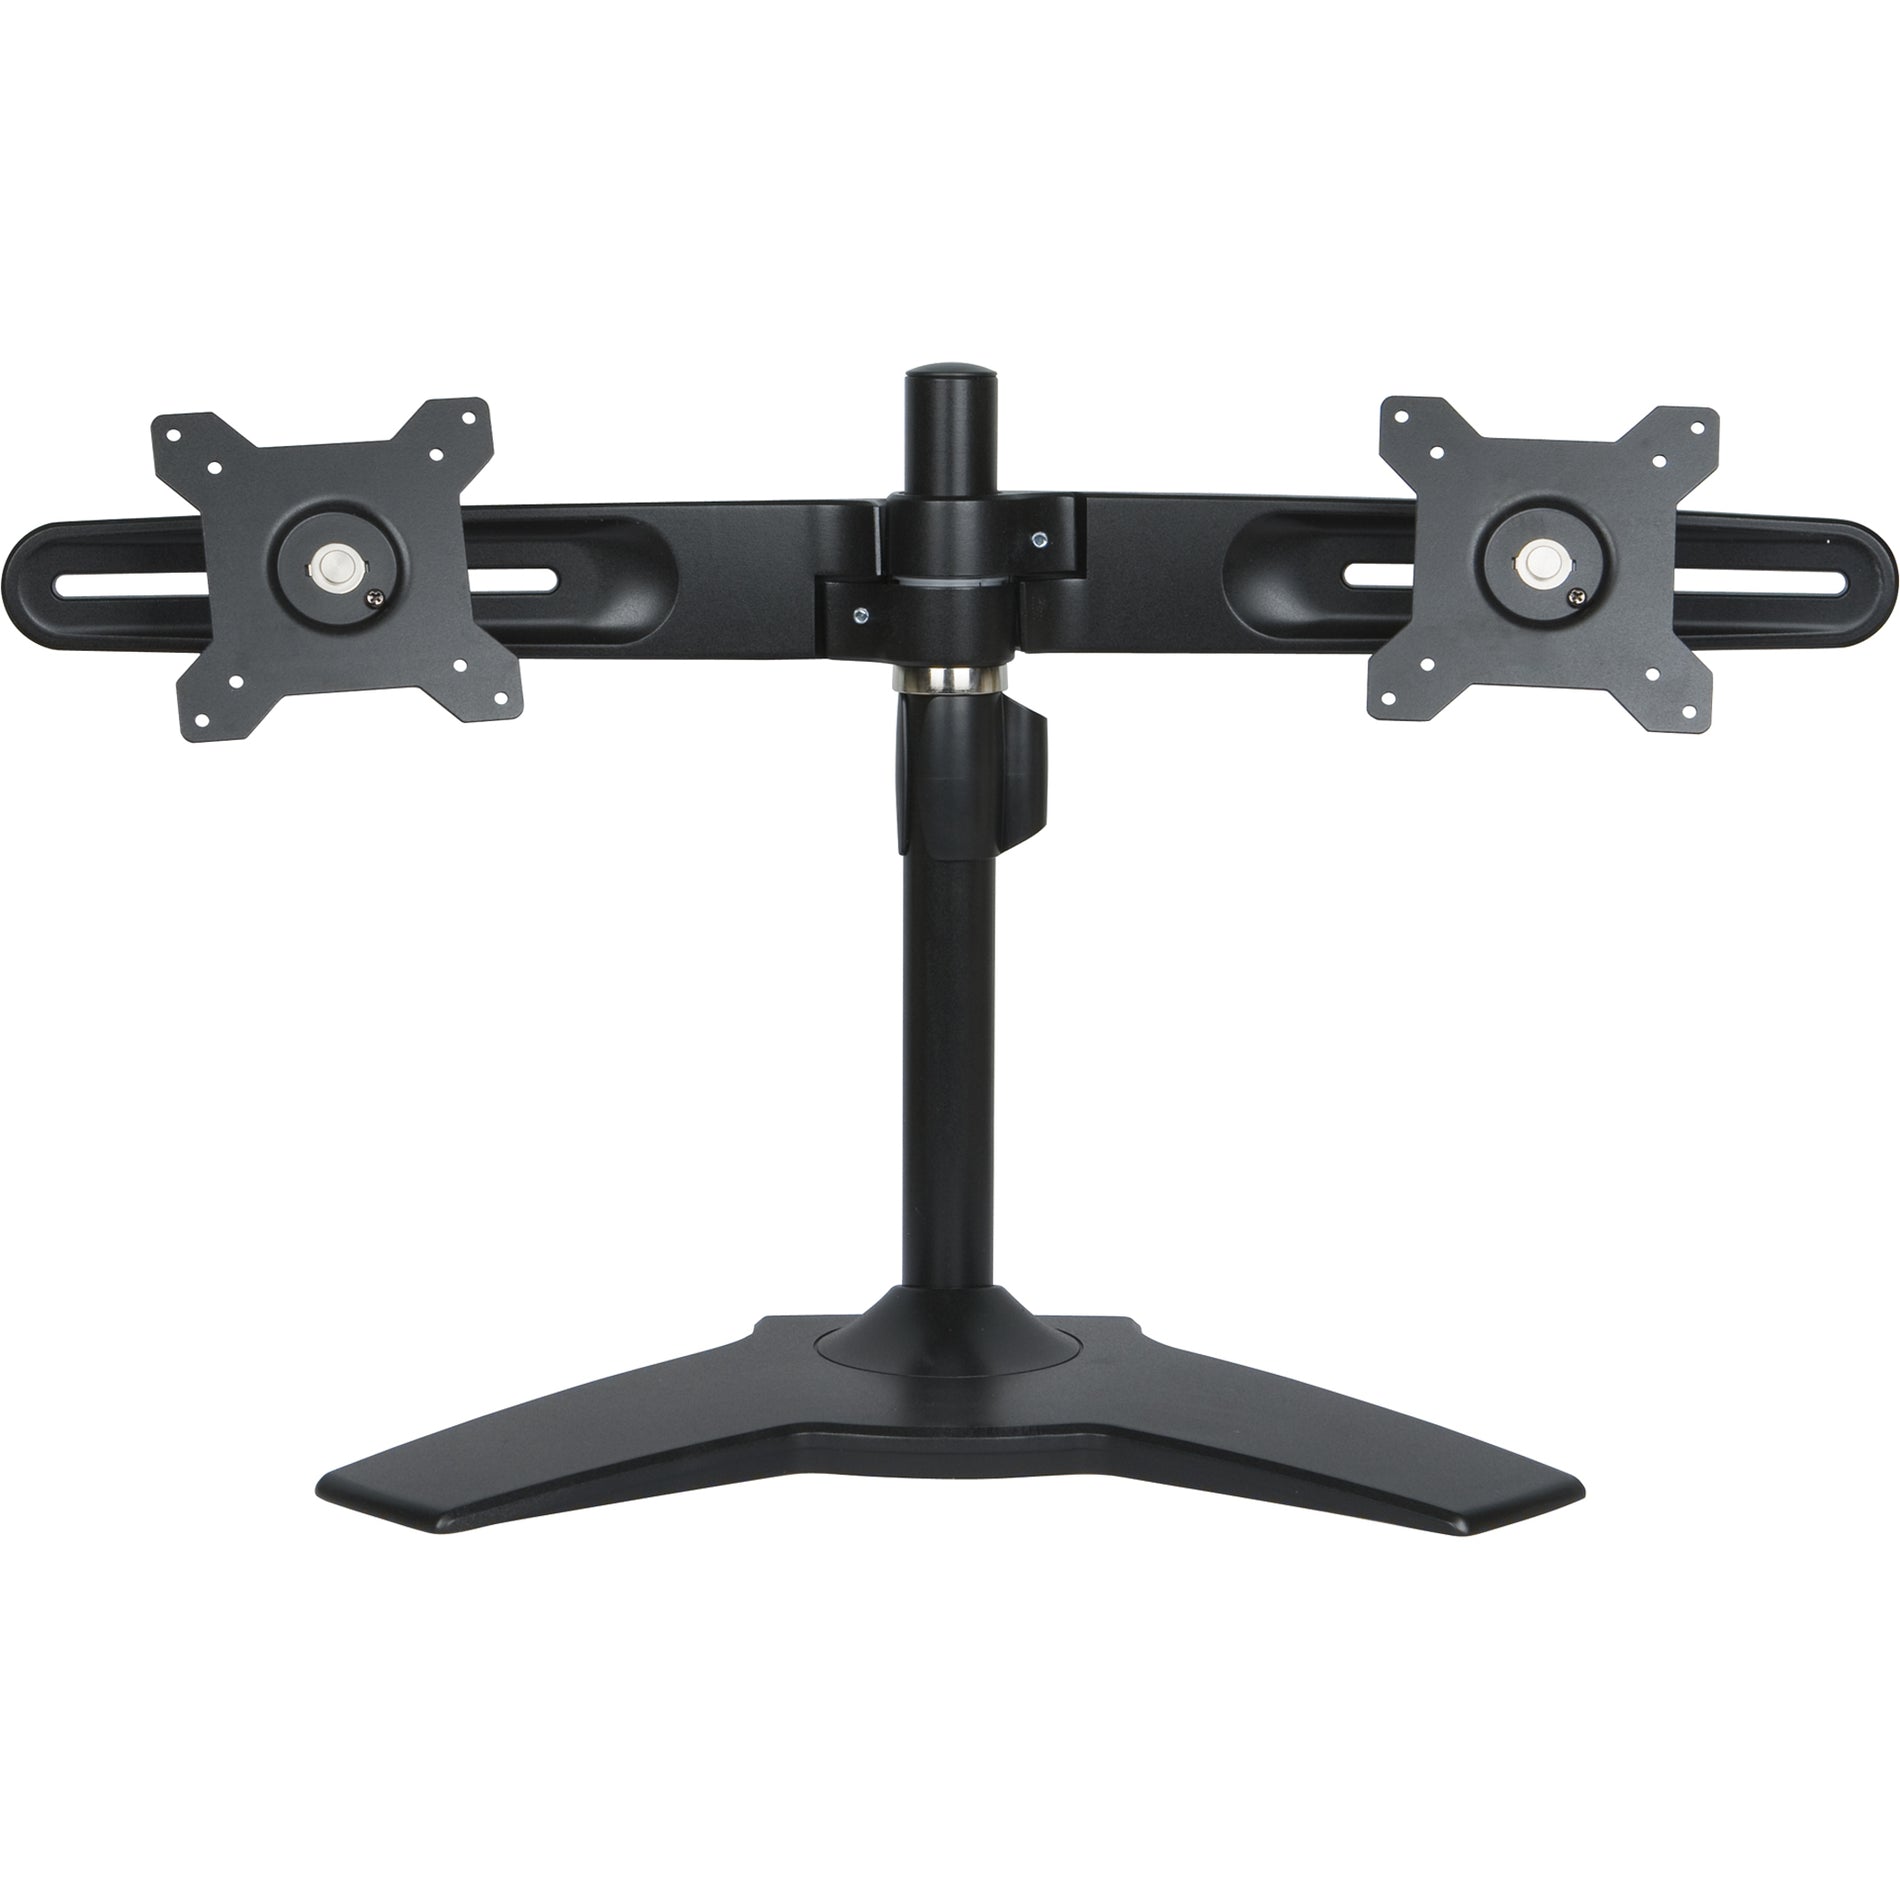 Planar 997-5253-00 AS2 Black Dual Monitor Stand, Supports 17-24" Displays, Tilt, Swivel, Rotate, VESA Compatible